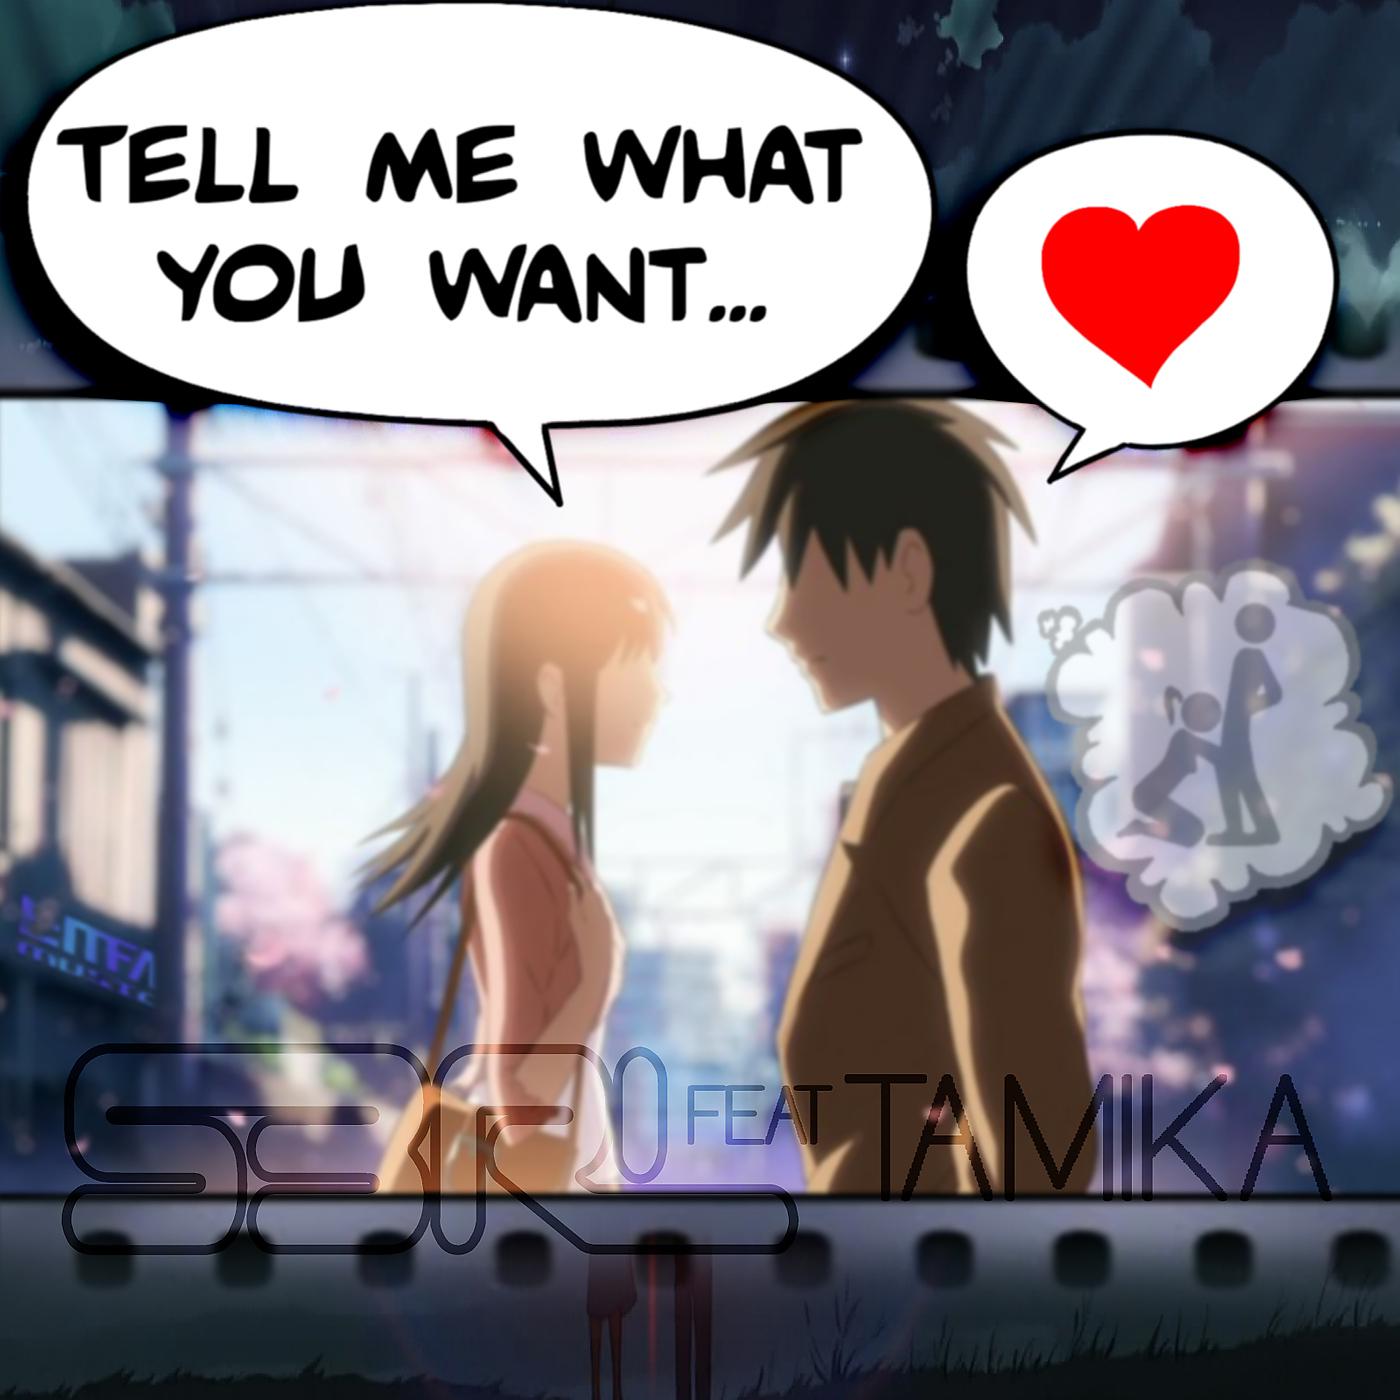 Just tell me what you do. Tell me what you want. Tamika s3rl. S3rl tell me what you want. Фф tell me what you want.